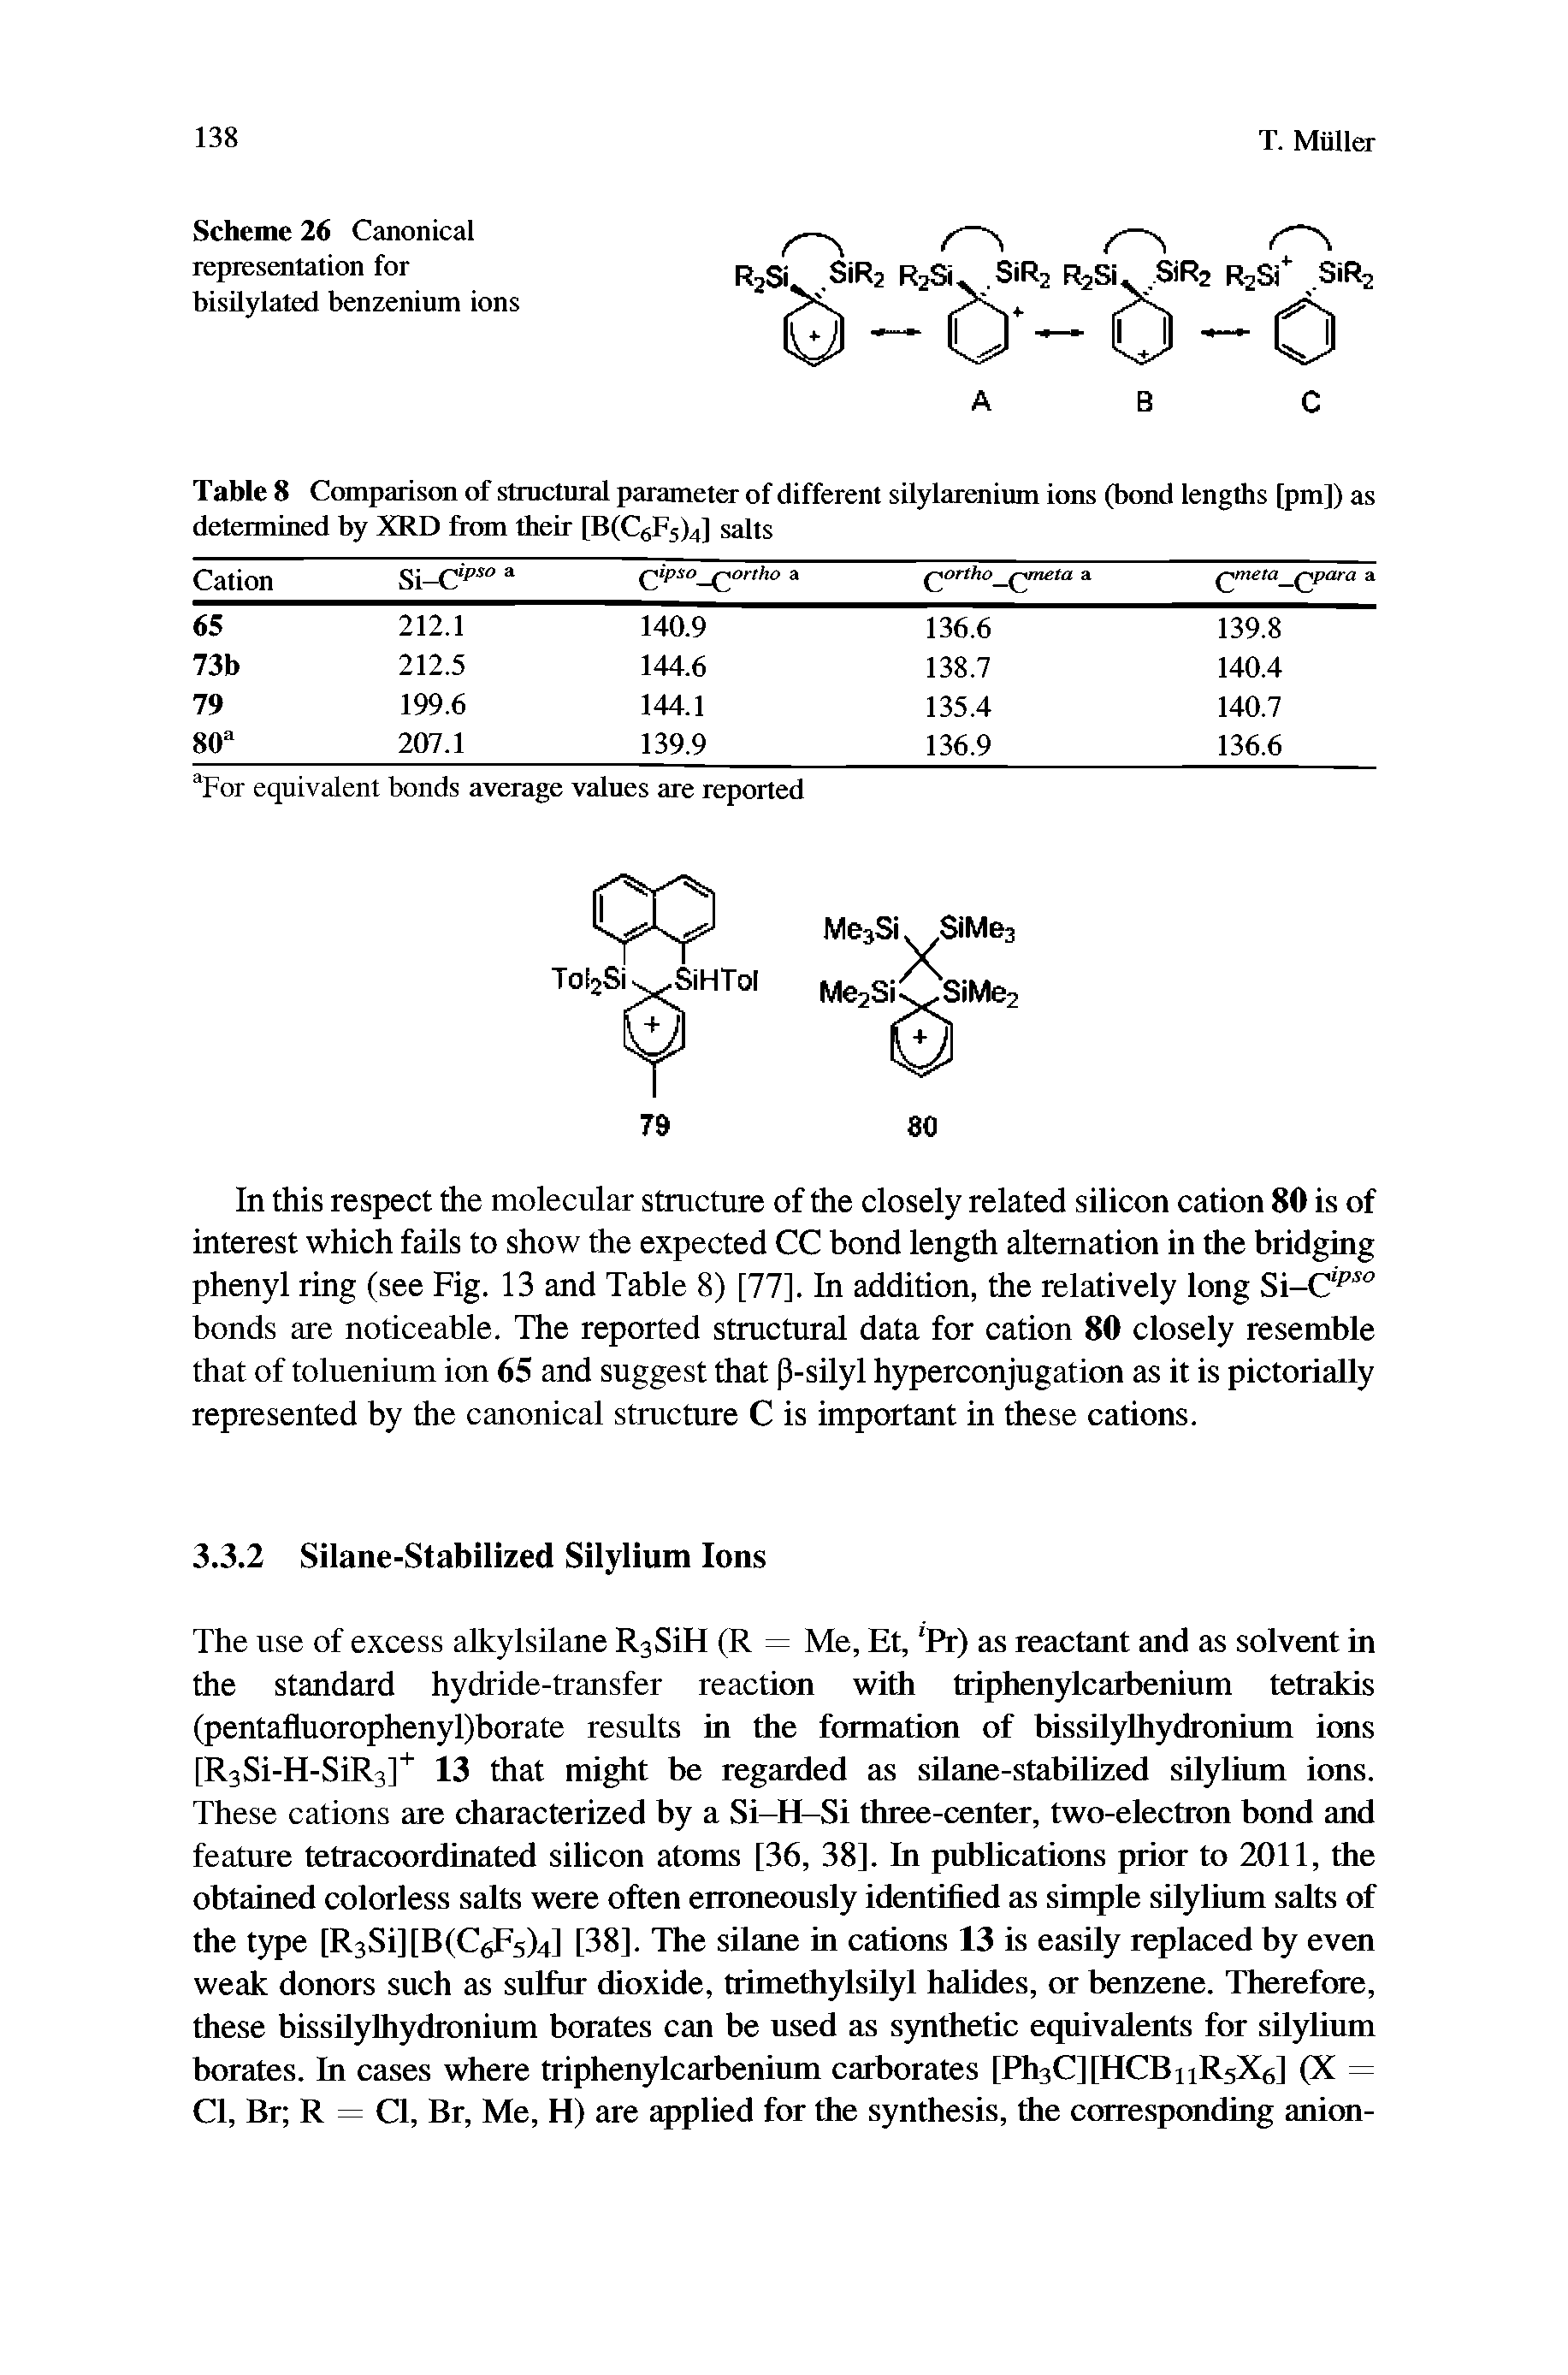 Table 8 Comparison of structural parameter of different silylarenium ions (bond lengths [pm]) as determined by XRD from their [B(CgF5)4] salts...